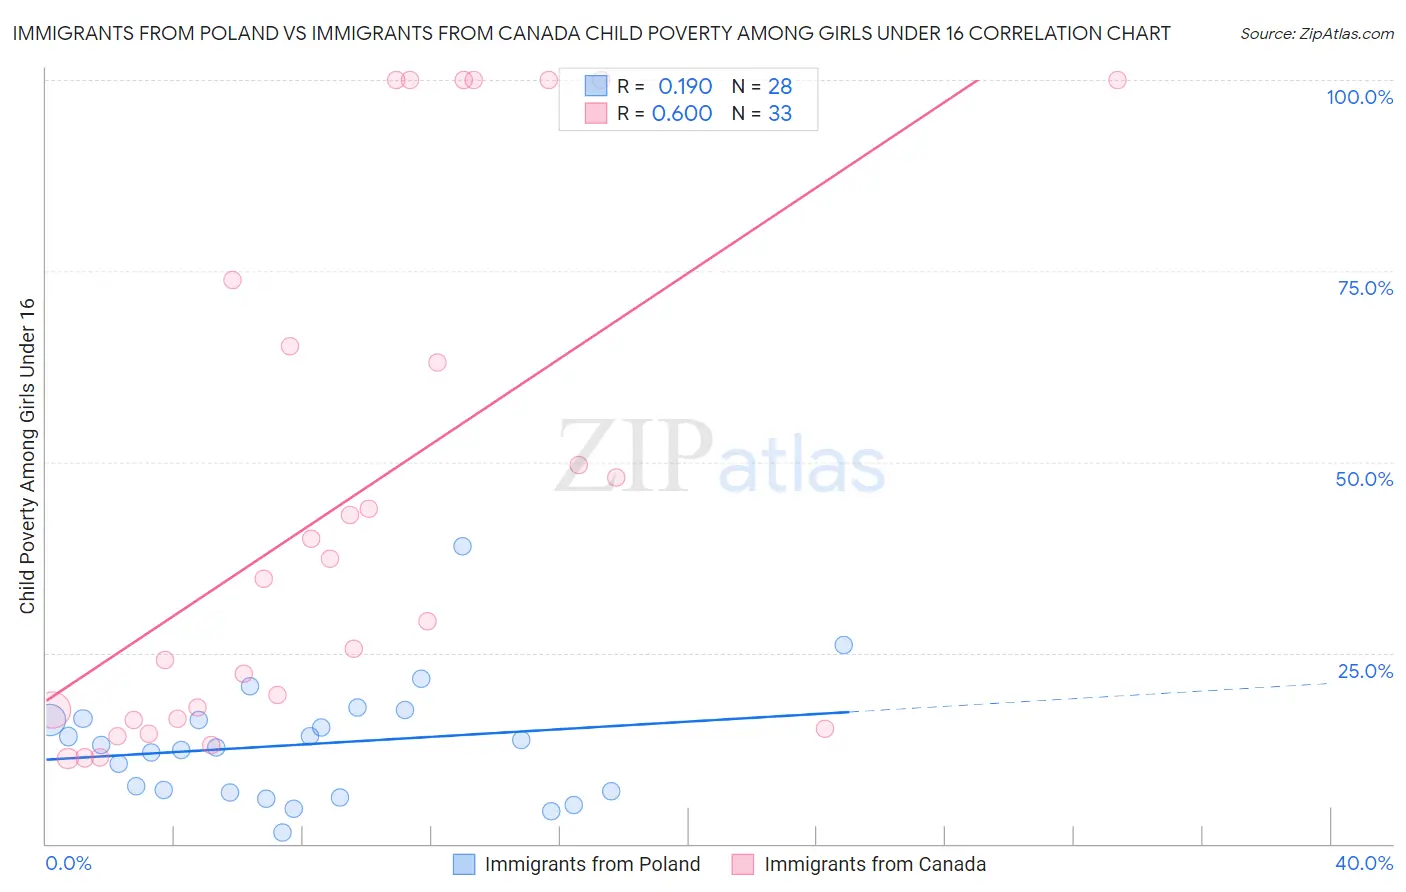 Immigrants from Poland vs Immigrants from Canada Child Poverty Among Girls Under 16